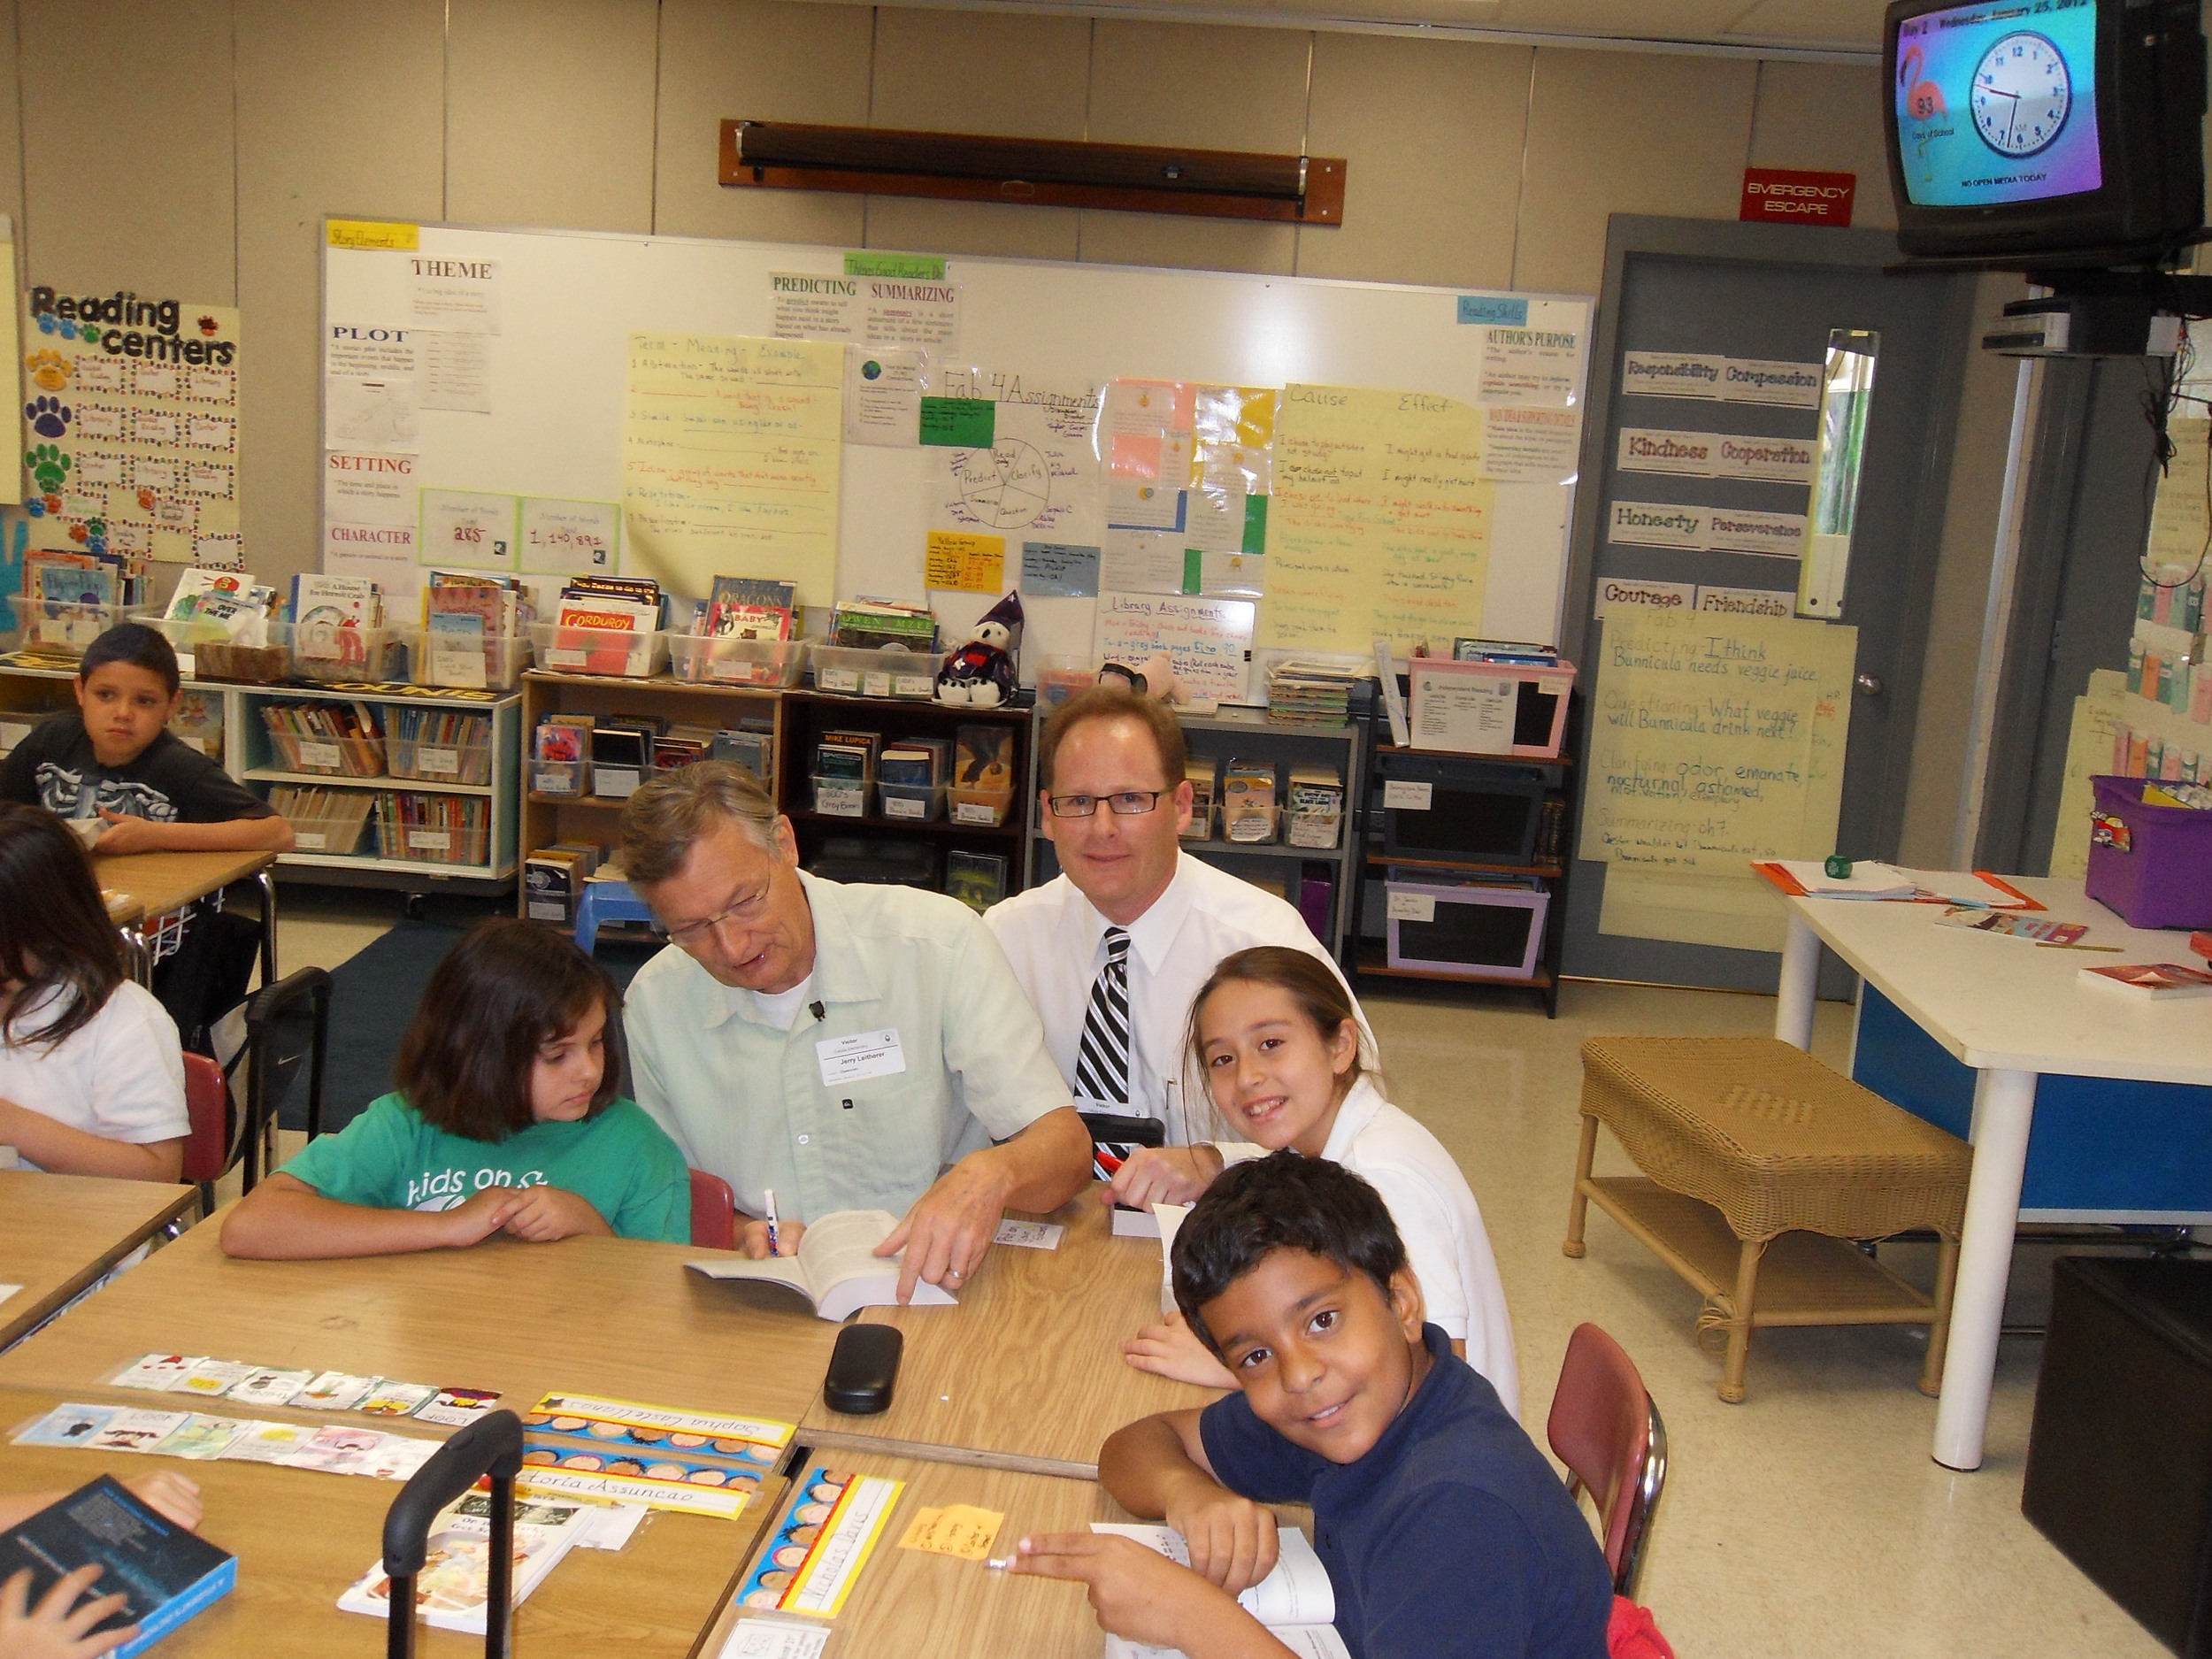 Adam and fellow Rotarian giving out dictionaries to the 3rd grade classes at Calusa Elementary School.